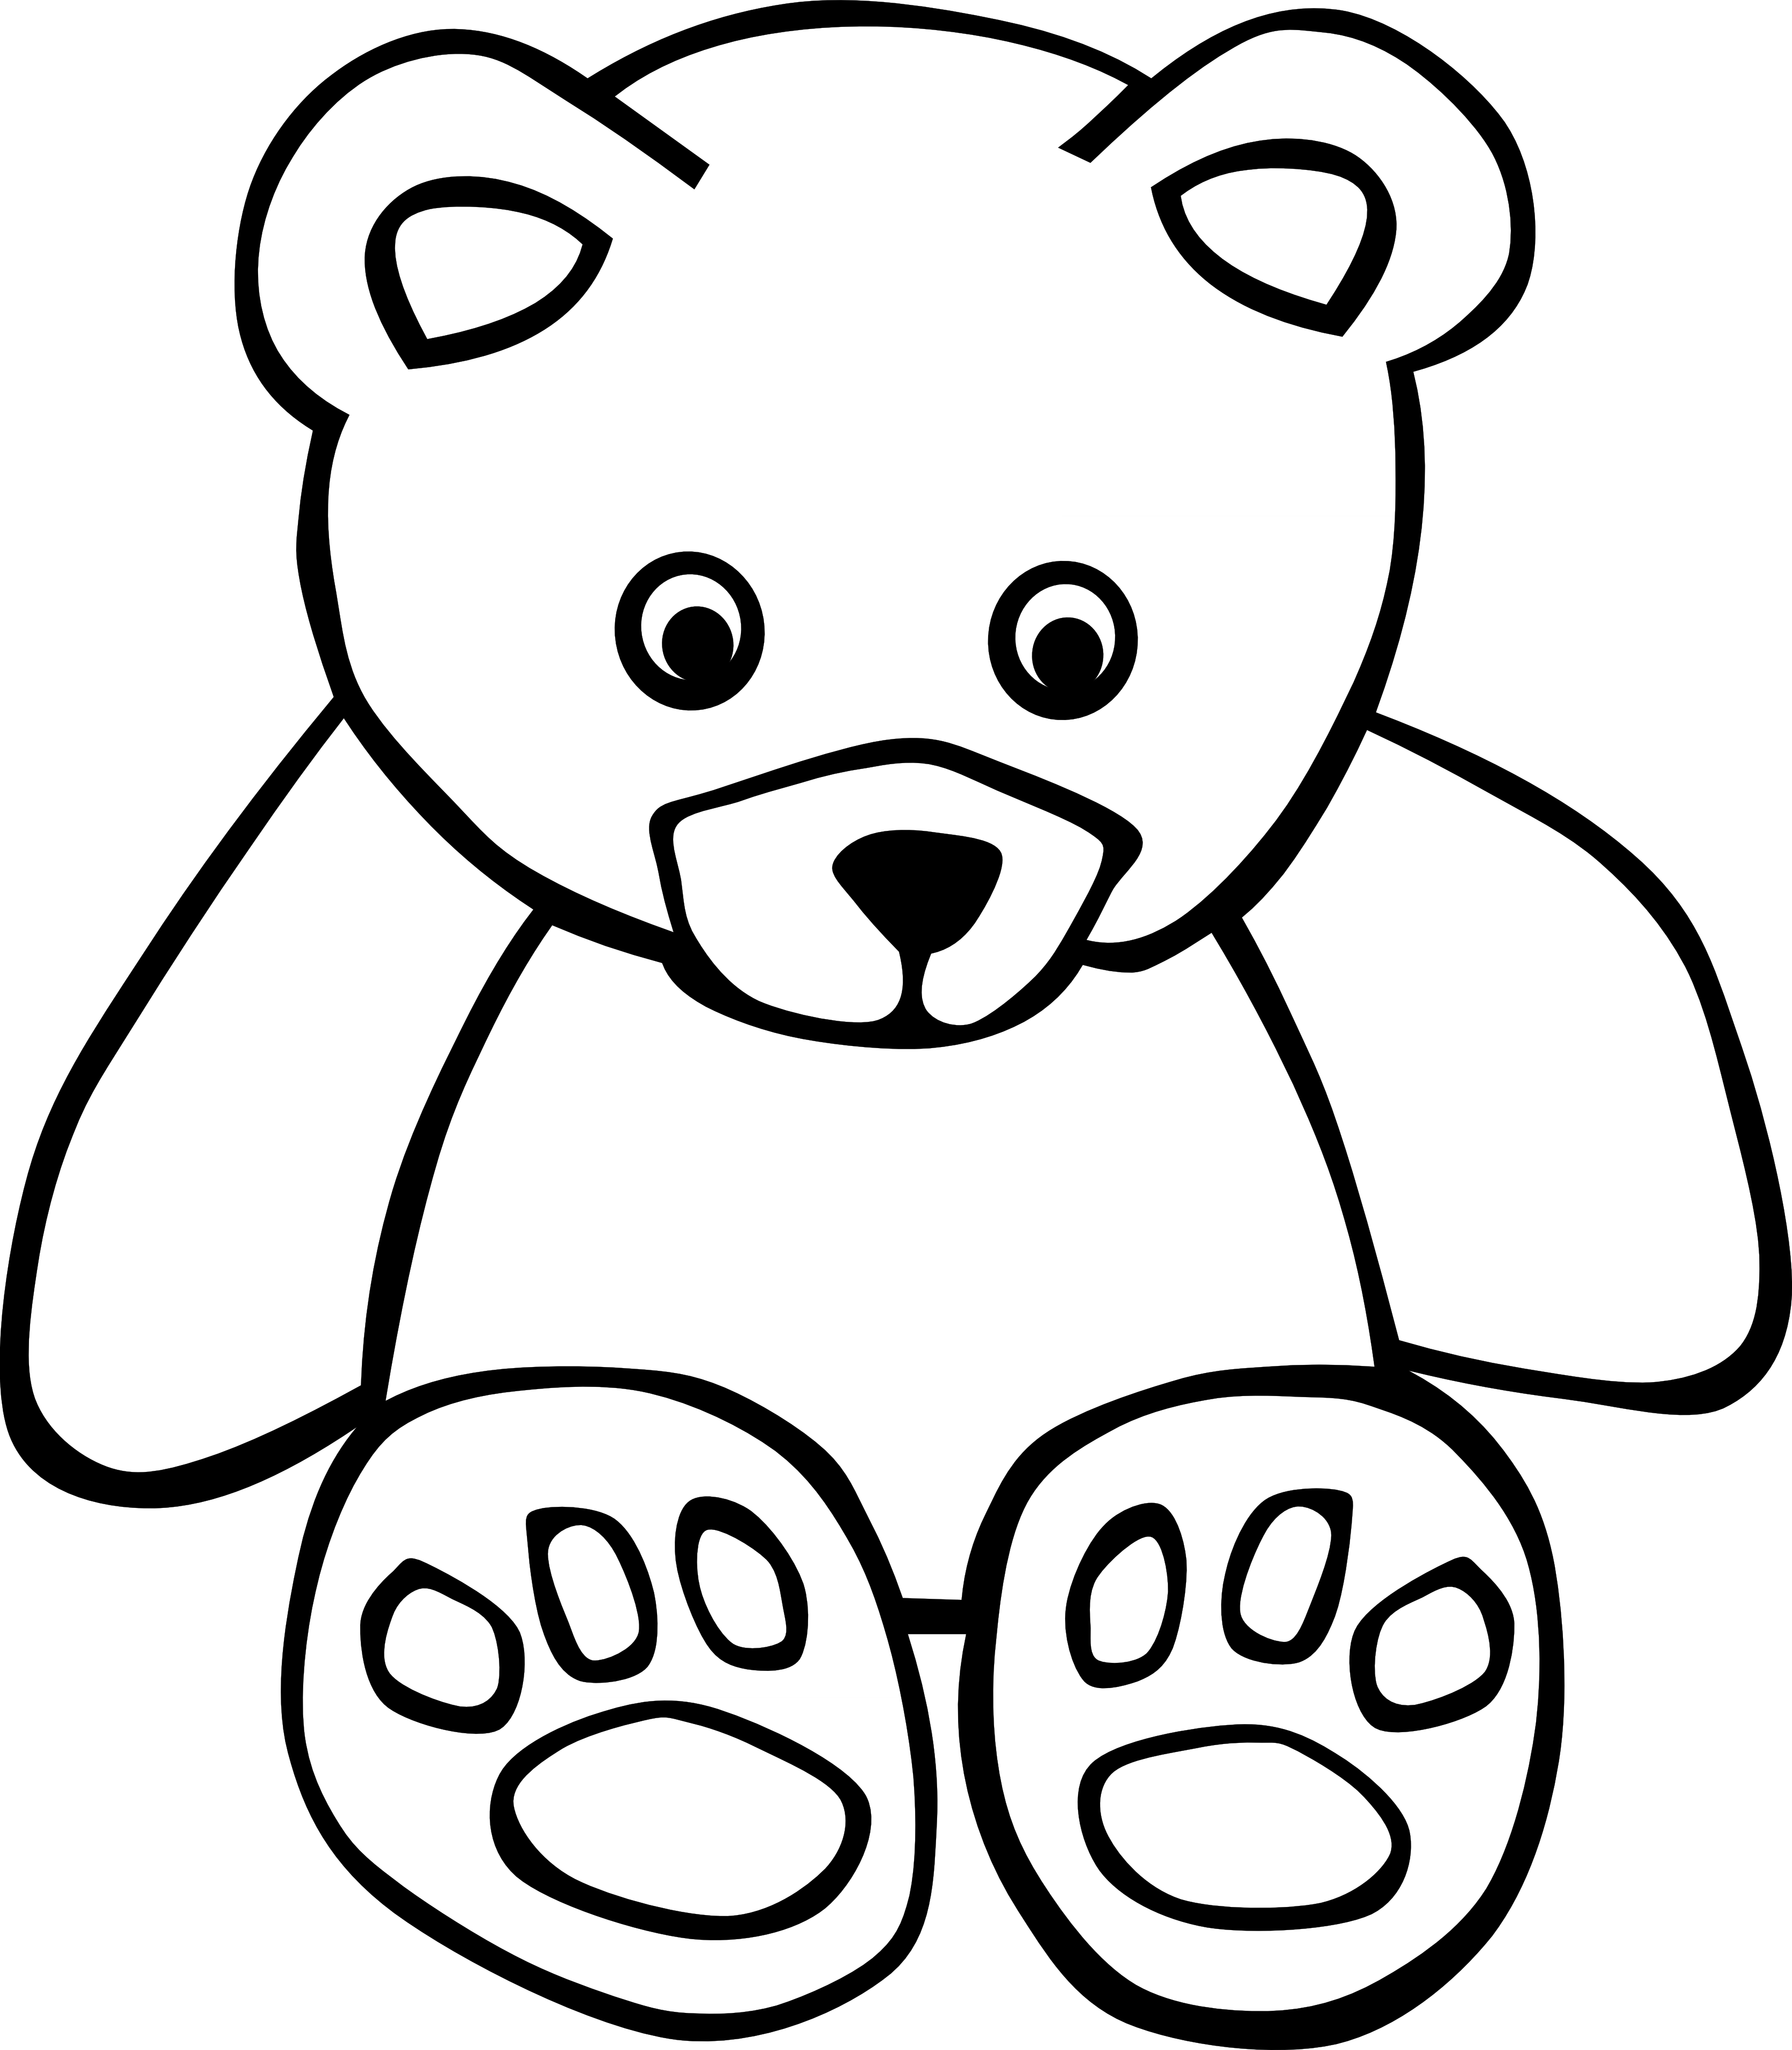 teddy bear clipart black and white - photo #3